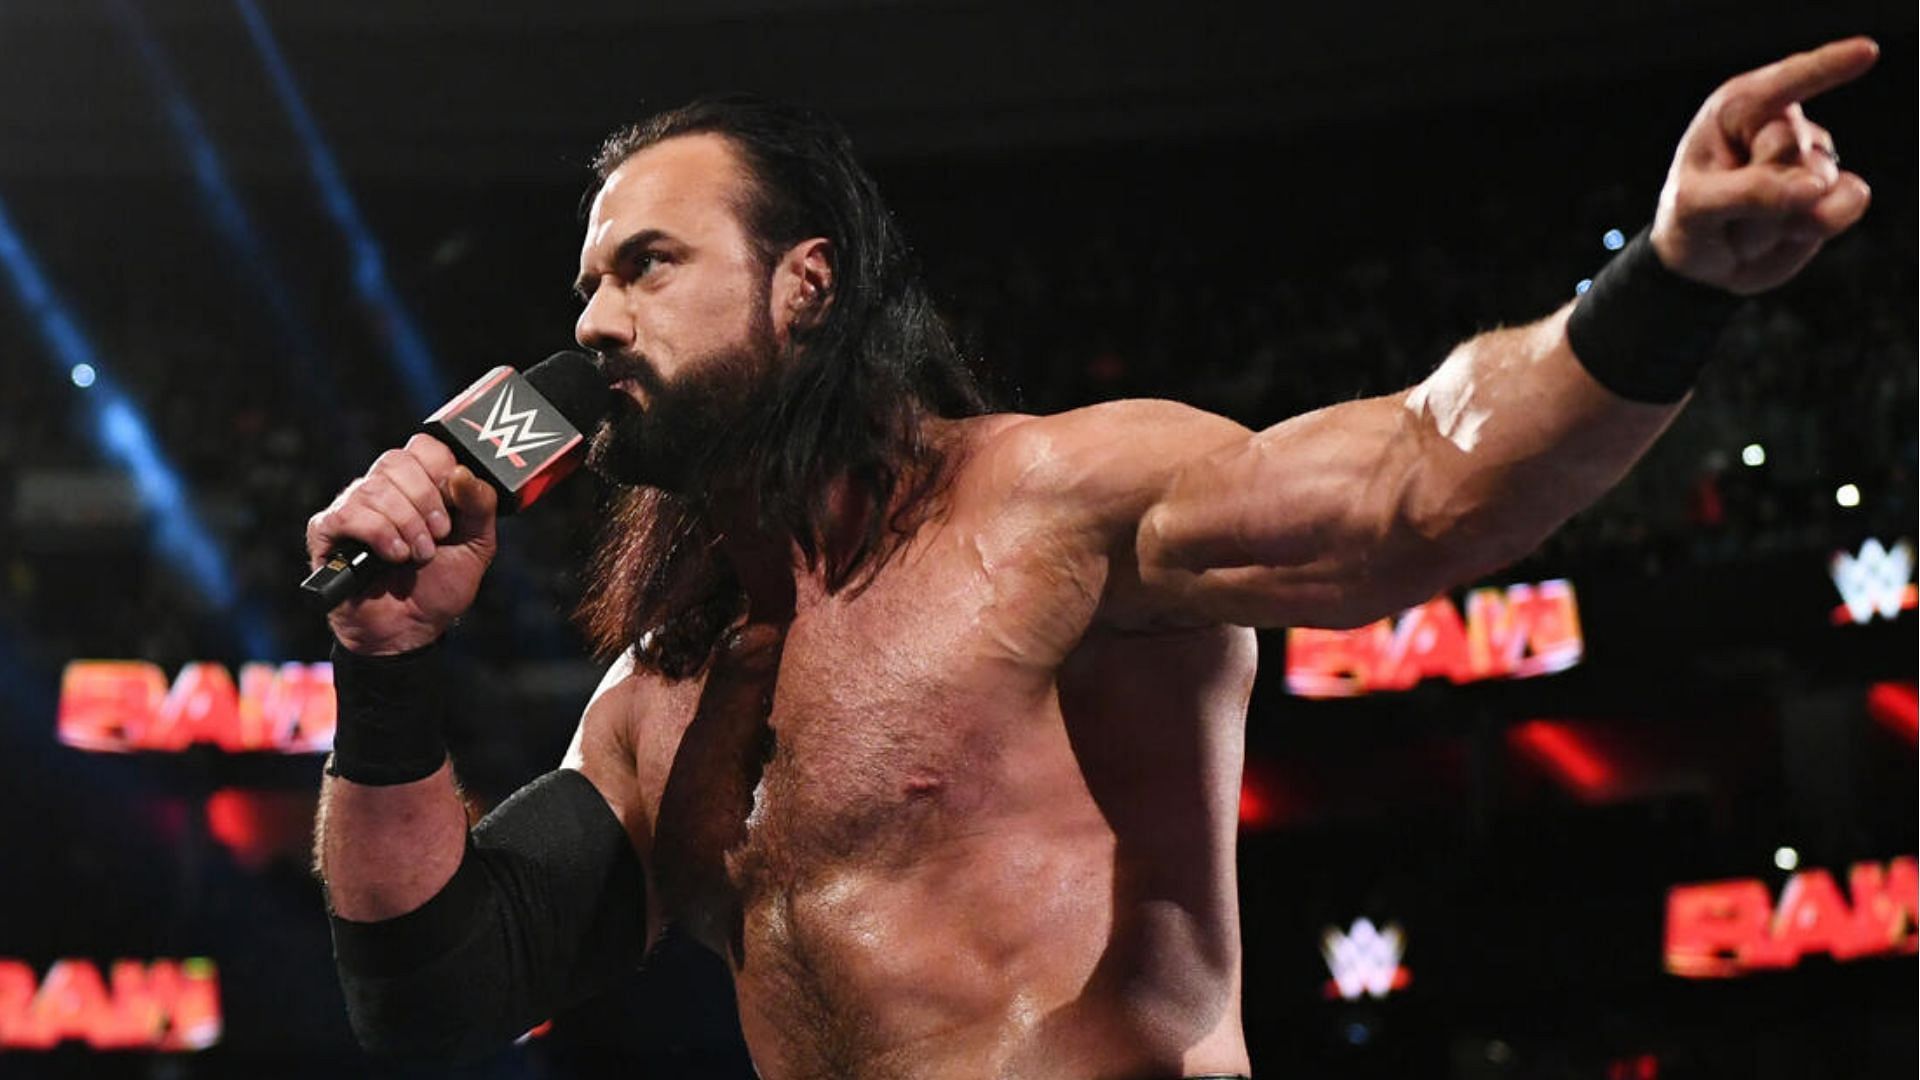 McIntyre had his WrestleMania moment ripped away from him over the weekend.